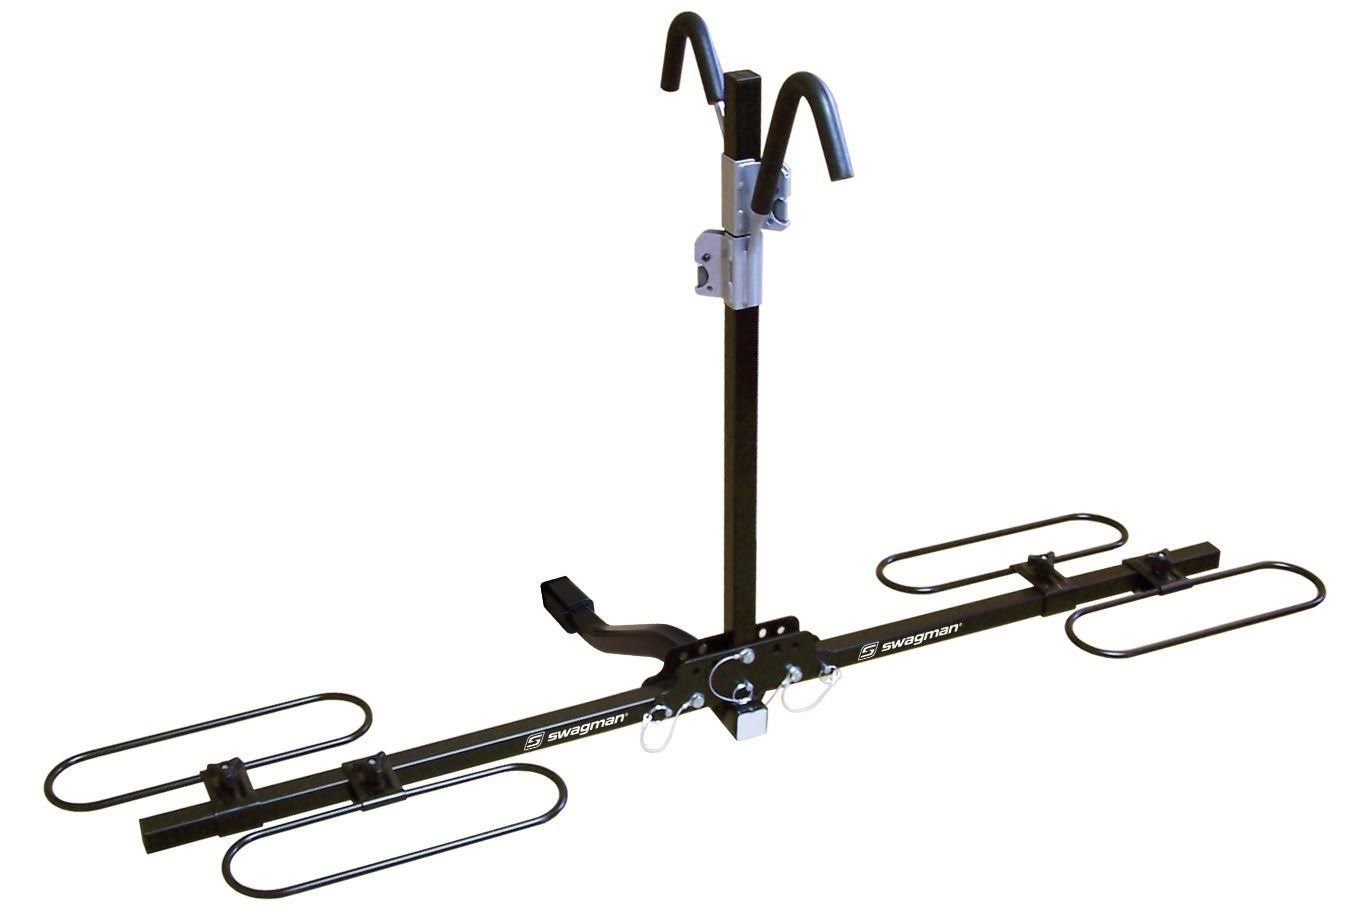 Swagman XC Cross-Country 2-Bike Hitch Mount Rack - 1 1/4" And 2" Receiver